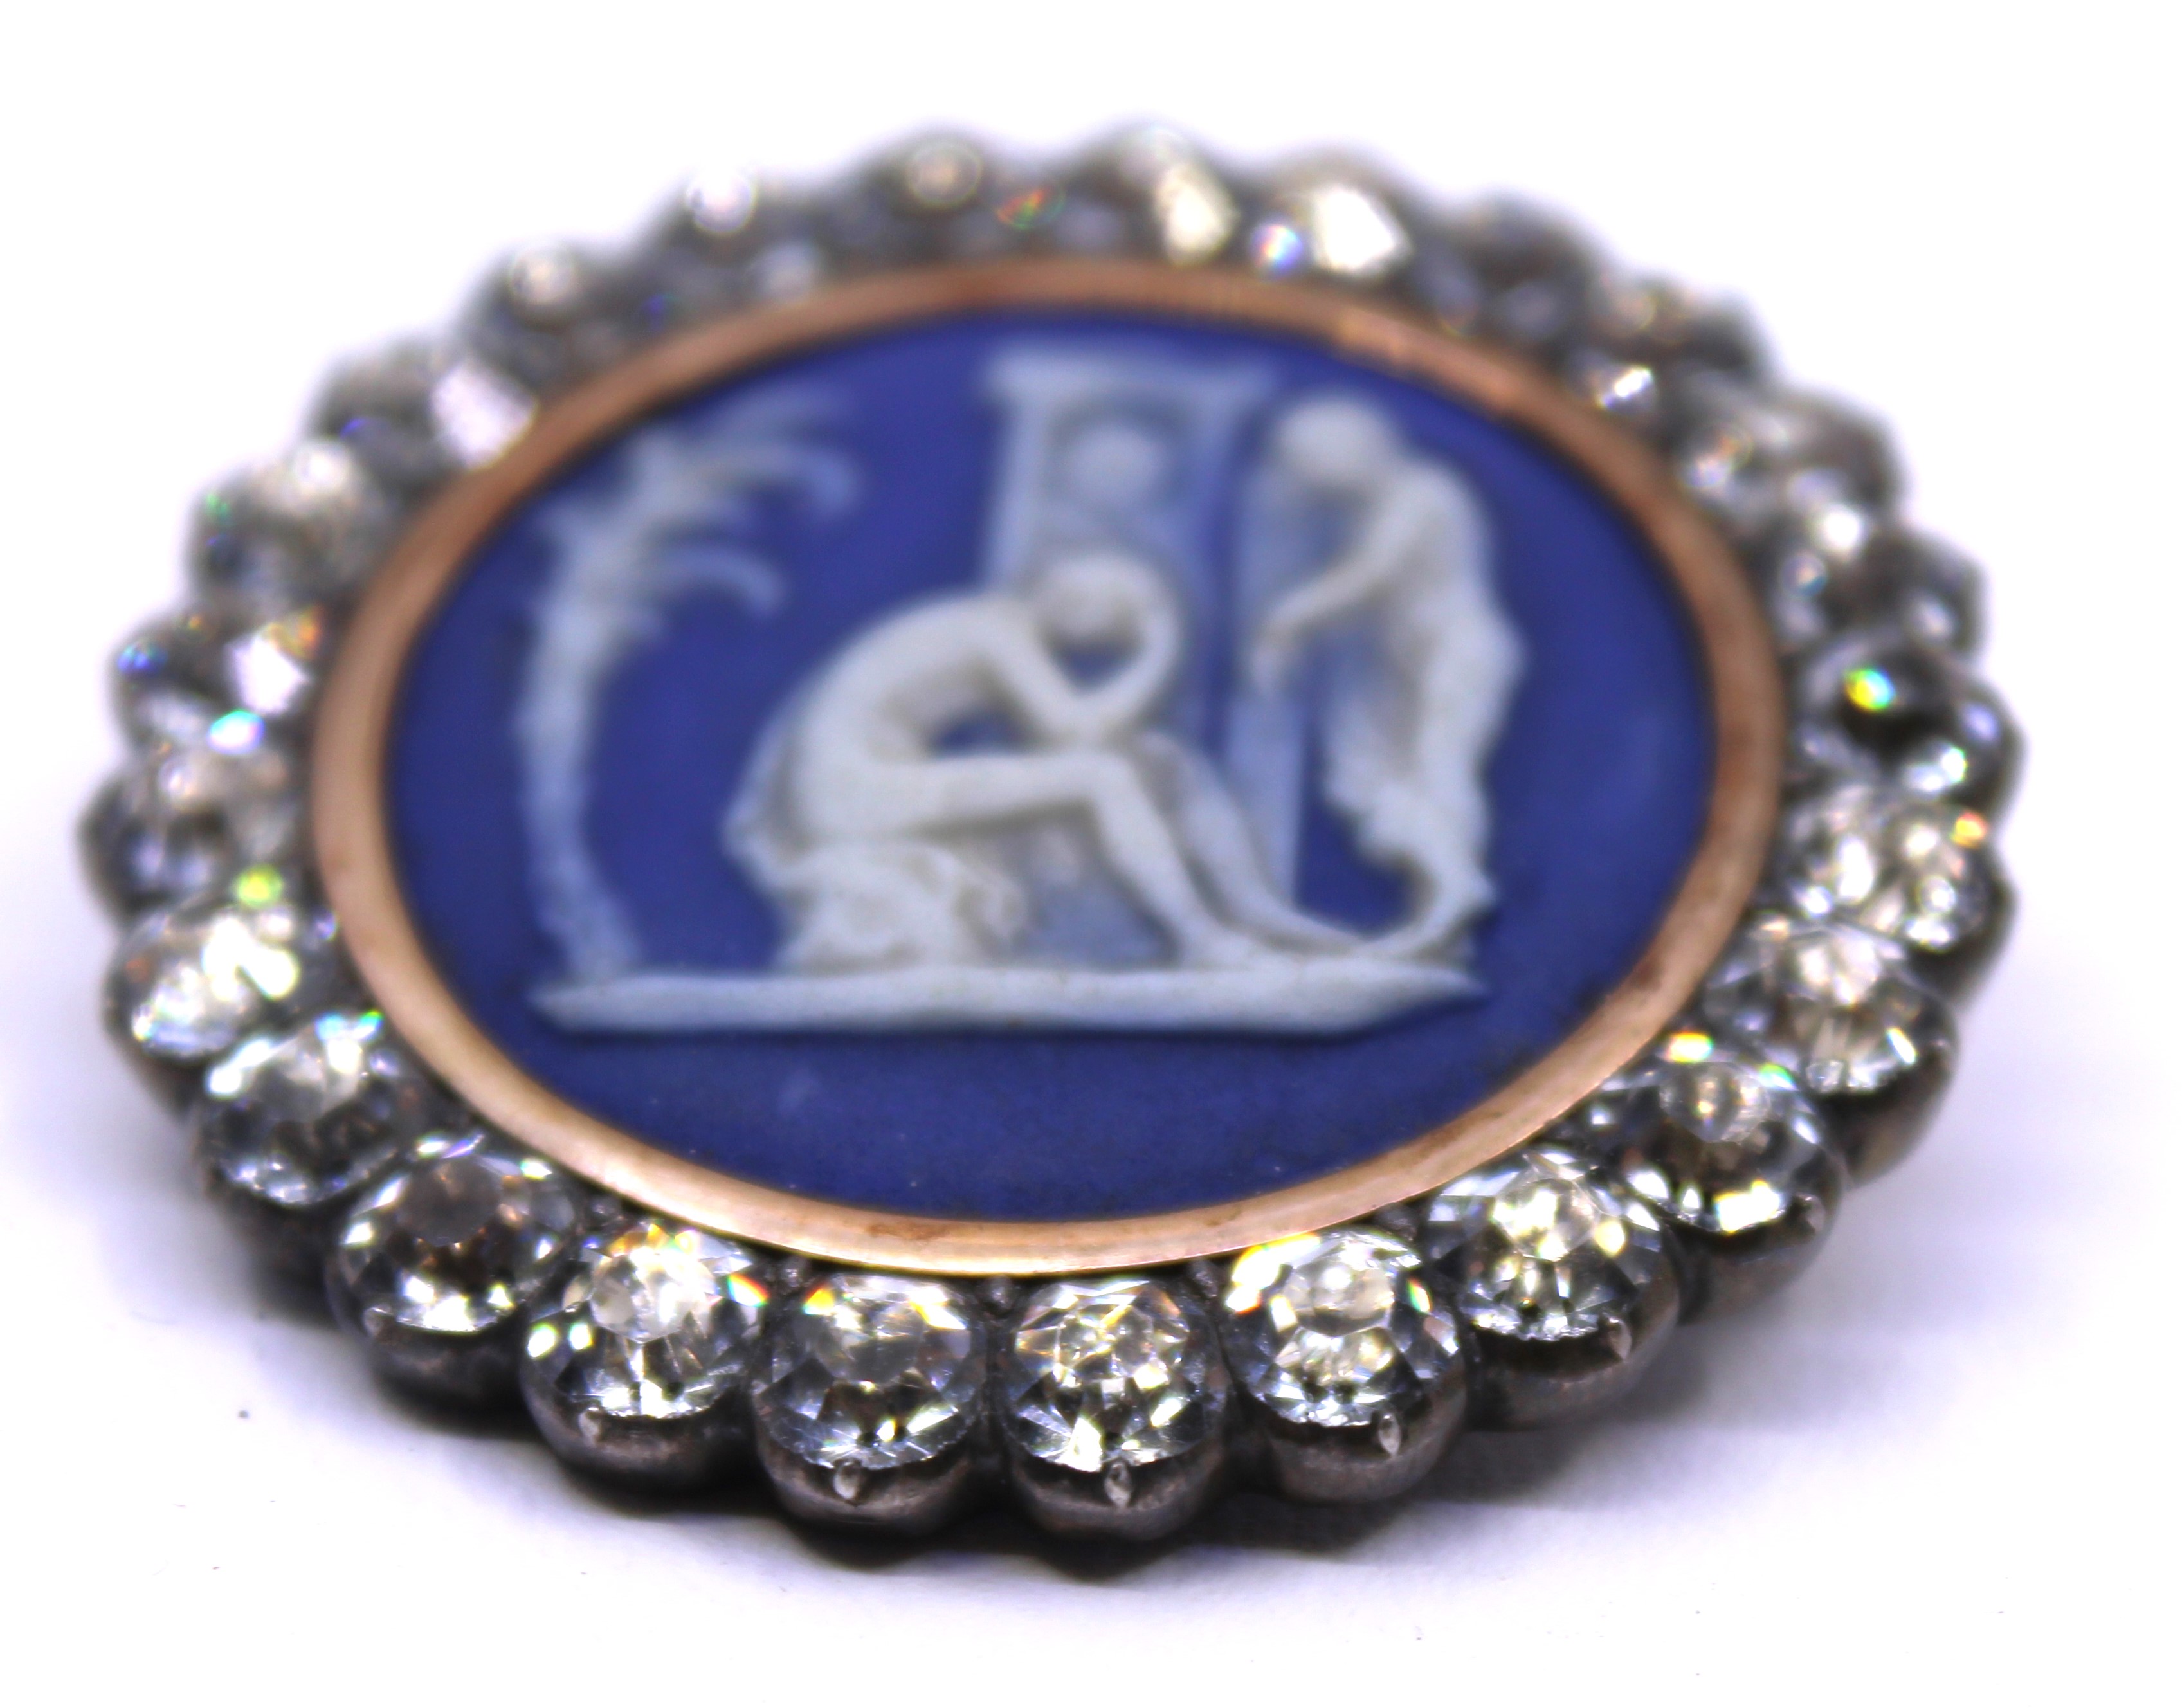 Circa 1780-1790 Georgian Blue Jasperware with white relief, mounted in cut steel Button Brooch. - Image 2 of 4